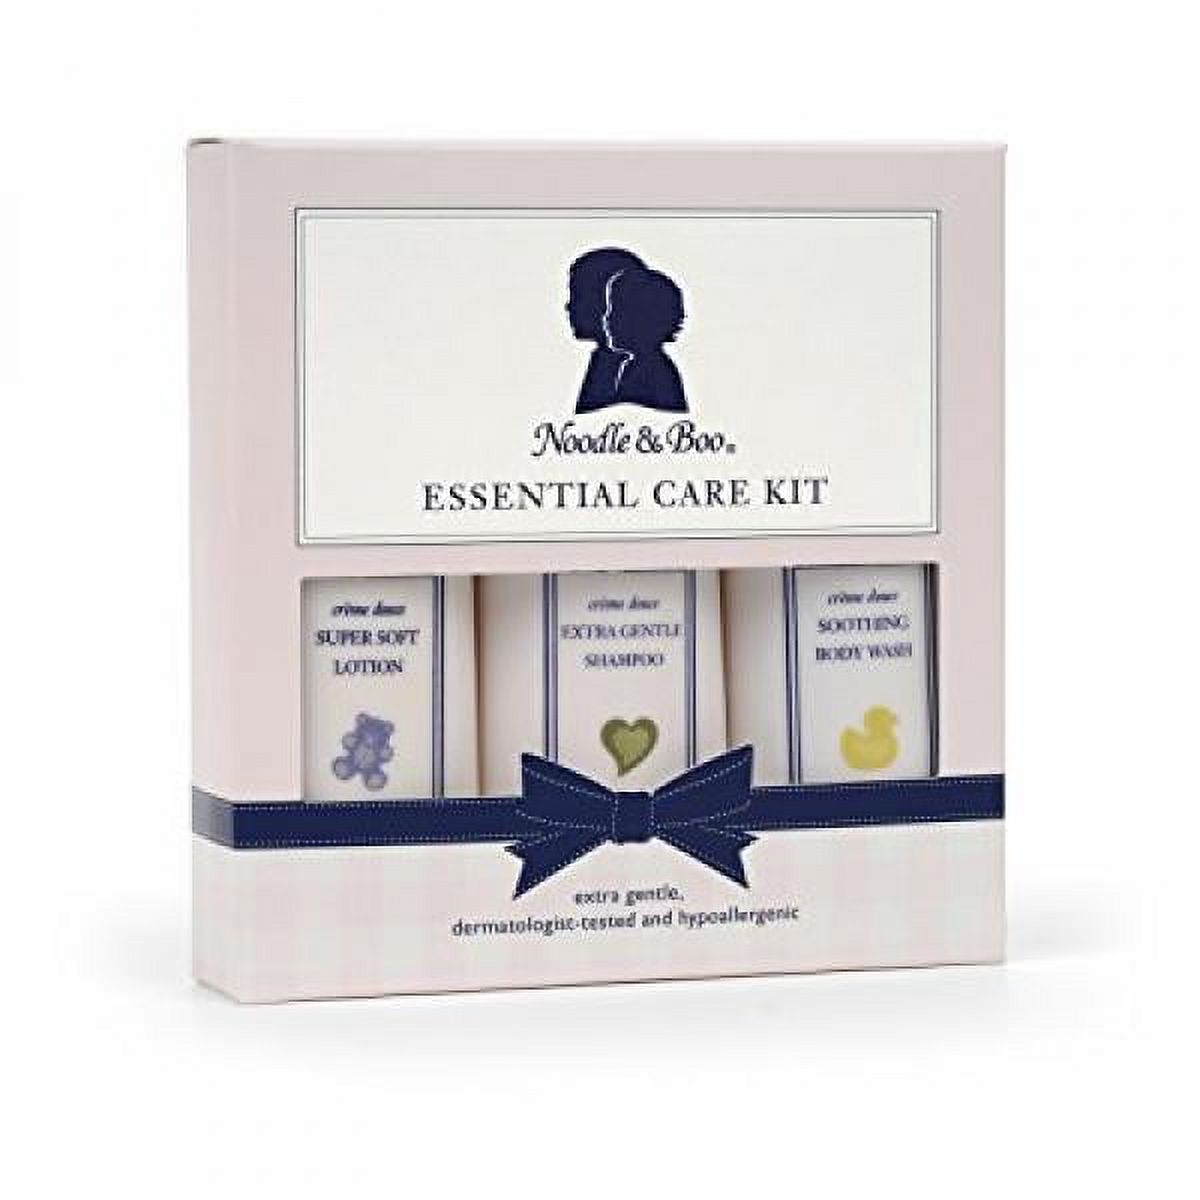 Noodle & Boo Essential Care Kit - image 1 of 2